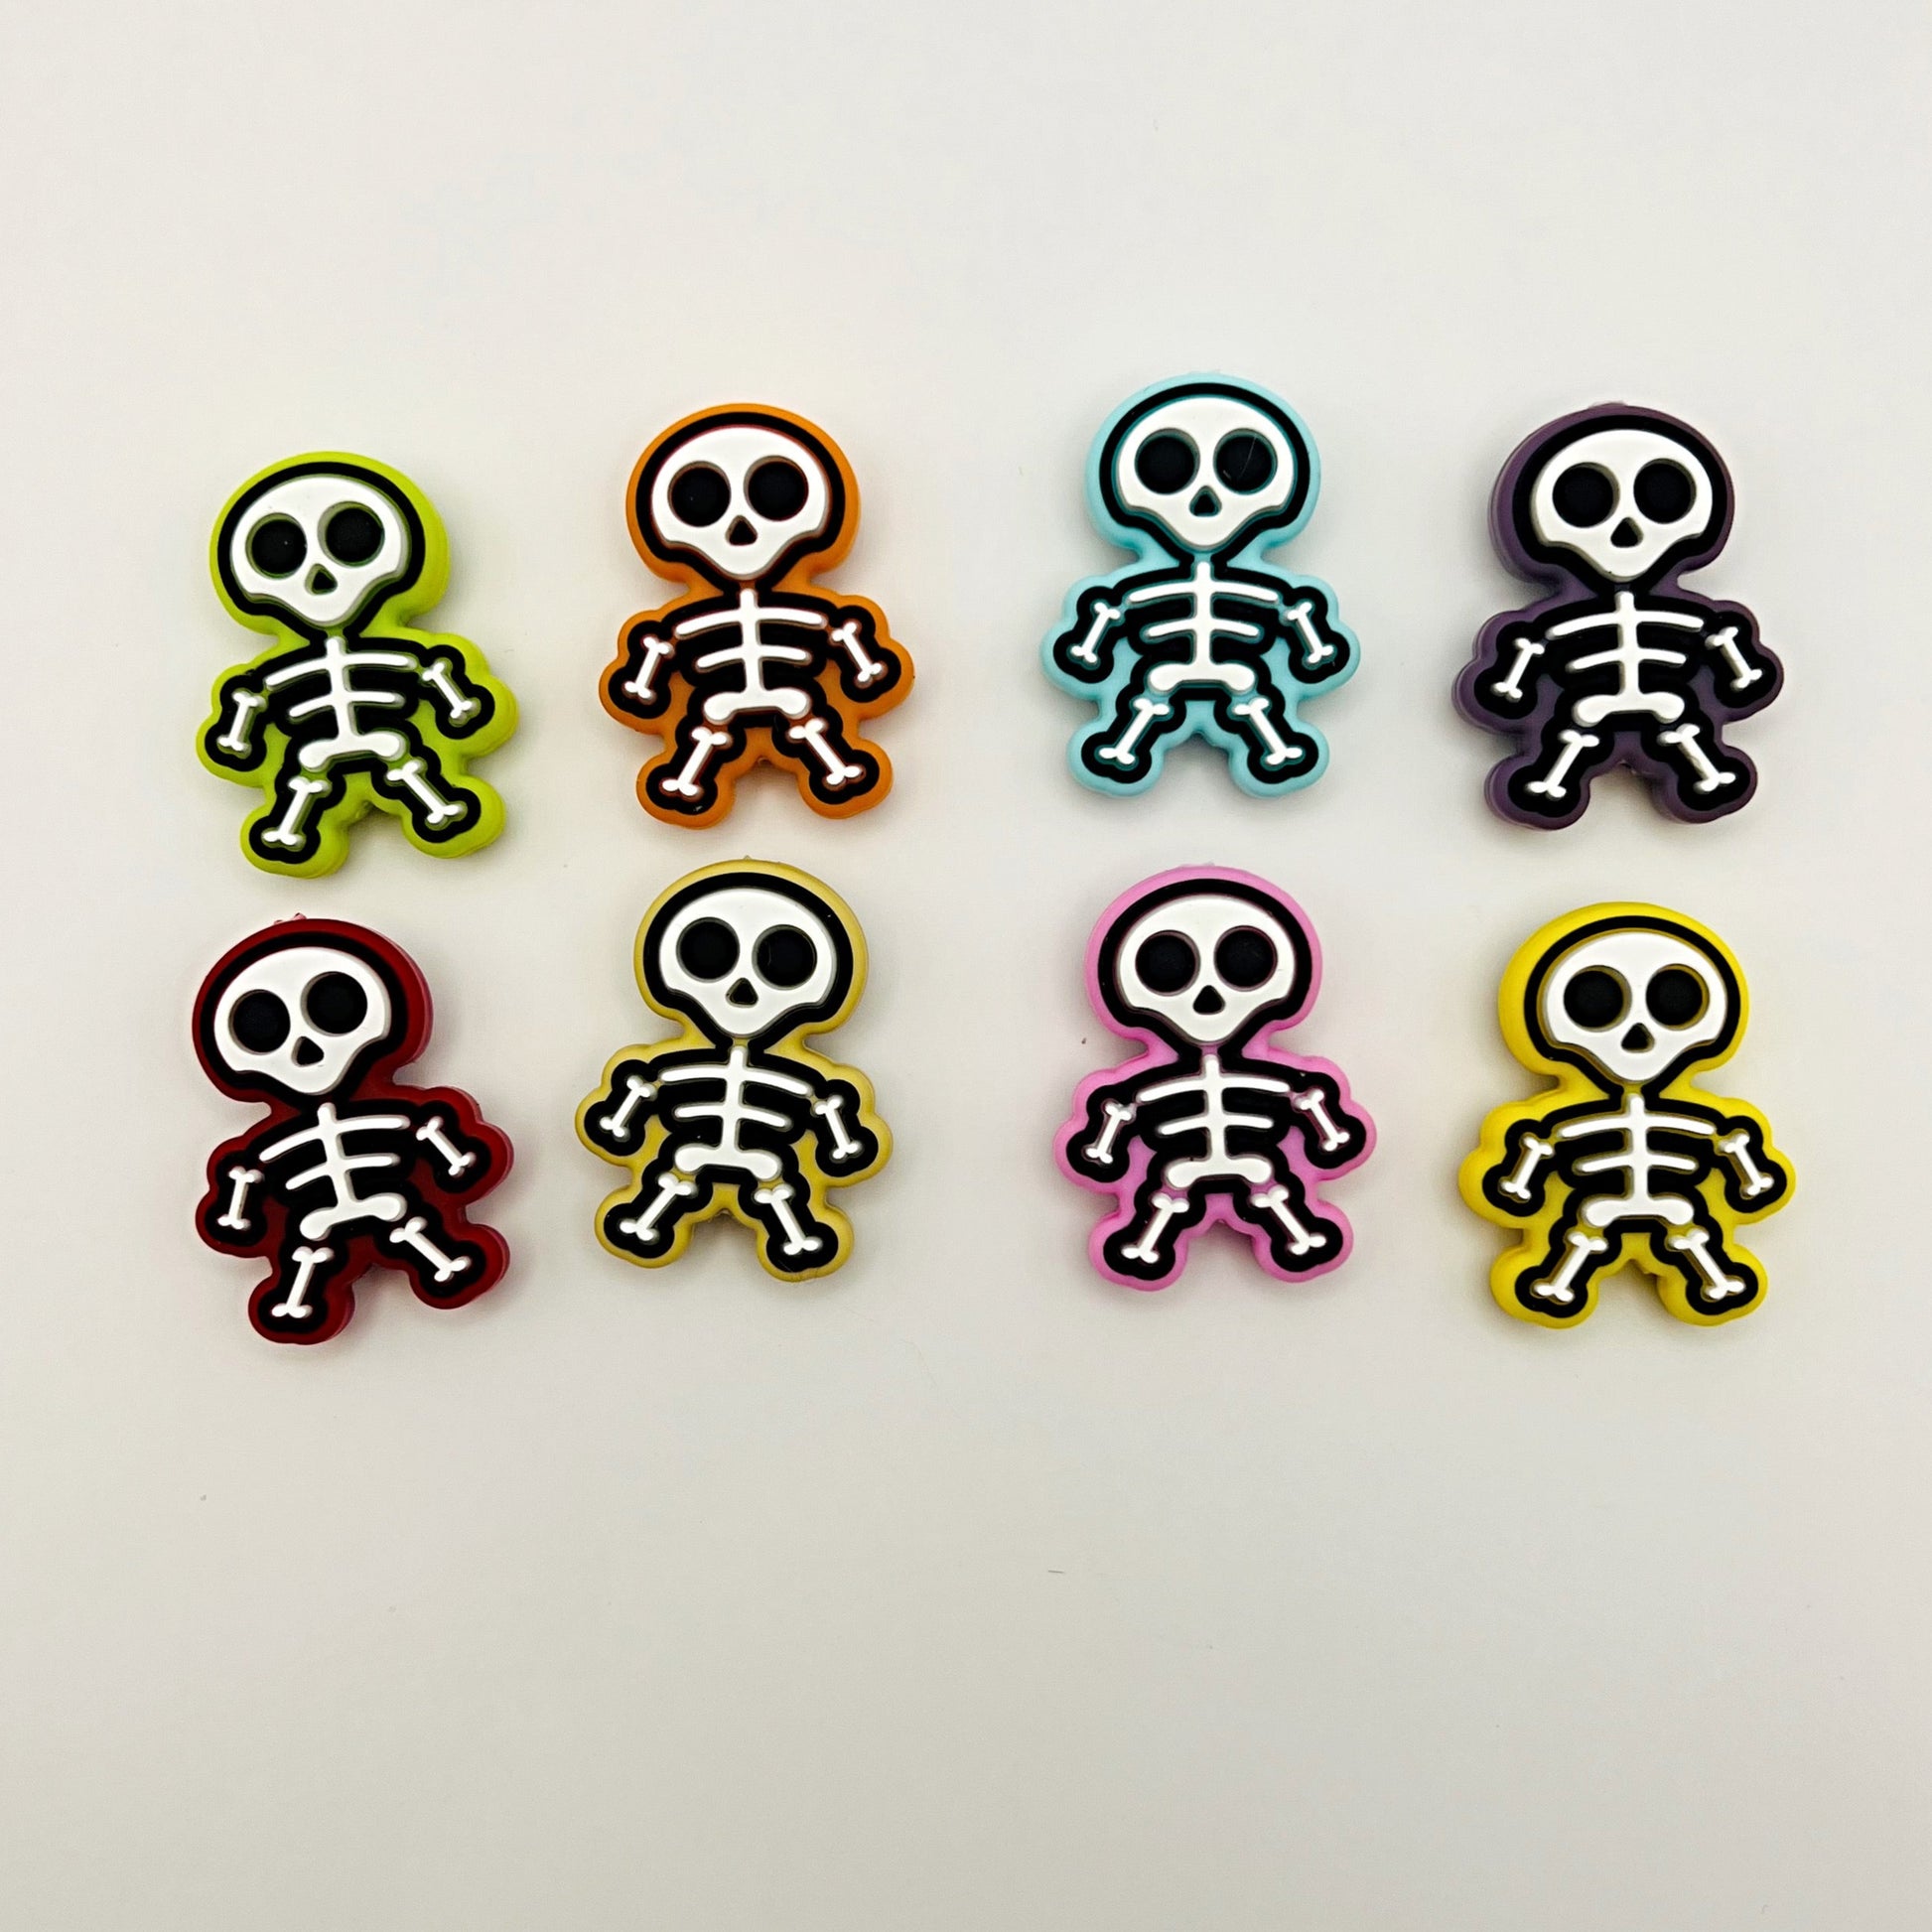 SALE - HALLOWEEN Focal Beads For Pens | Silicone | QTY: 1 bead - The Dazzle Depot